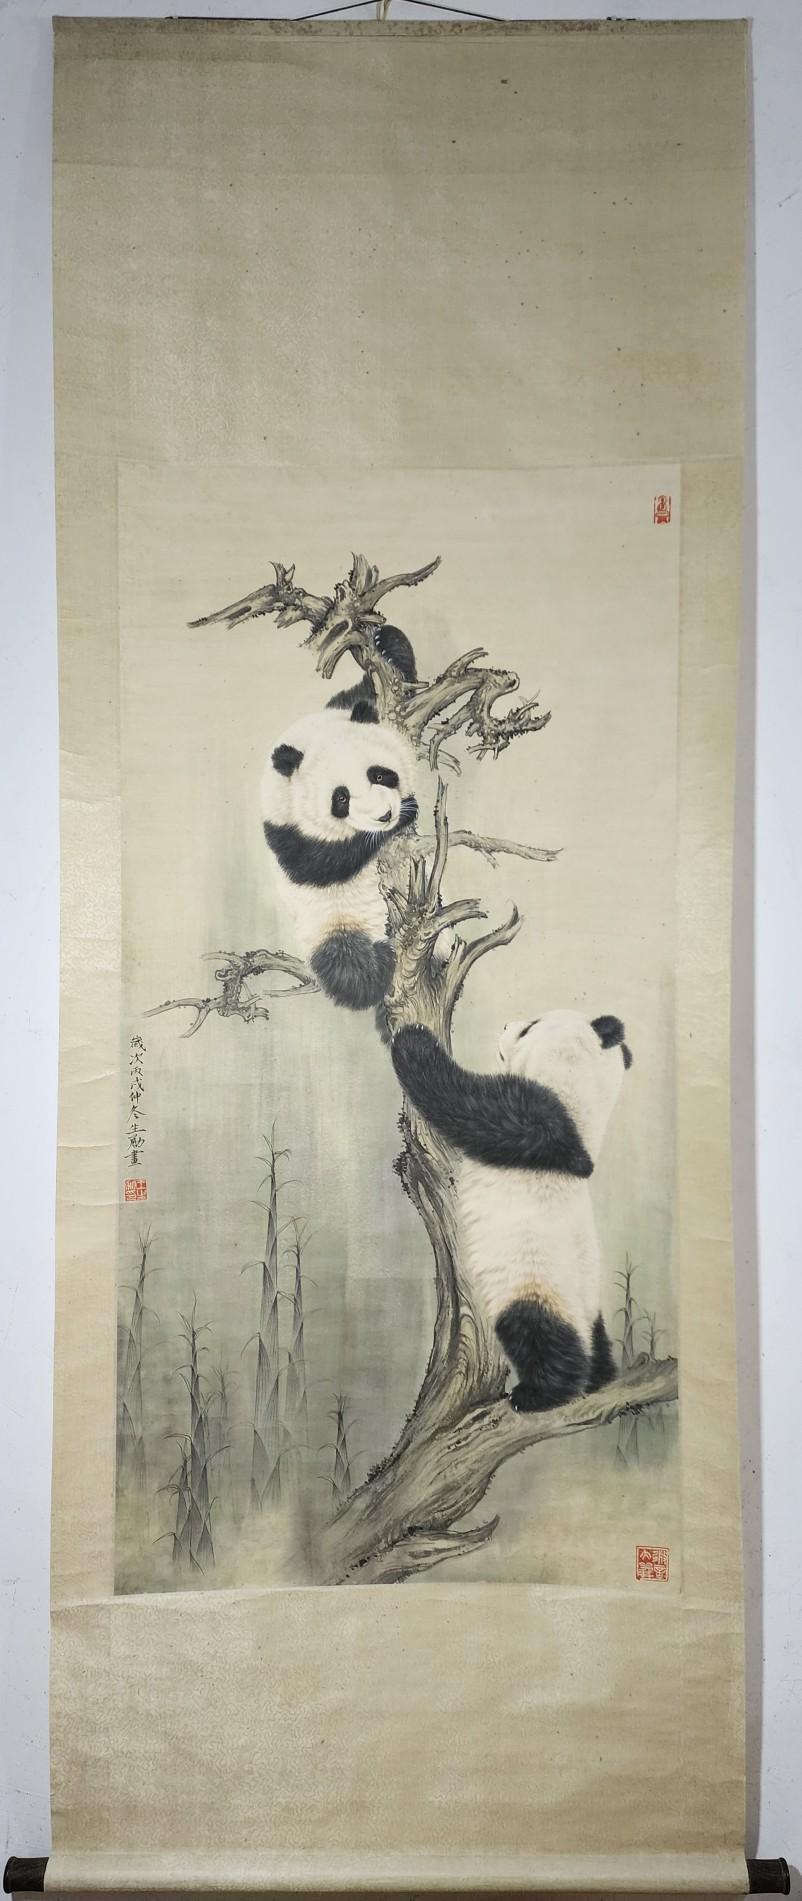 This Hand Painting of Two Climbing Pandas is a truly special collectible piece by Famous Chinese Artist Wang Shengyong 

Painting Details:
Material: paper
Painting paper size: 68 cm width
135cm height
Originating from China
